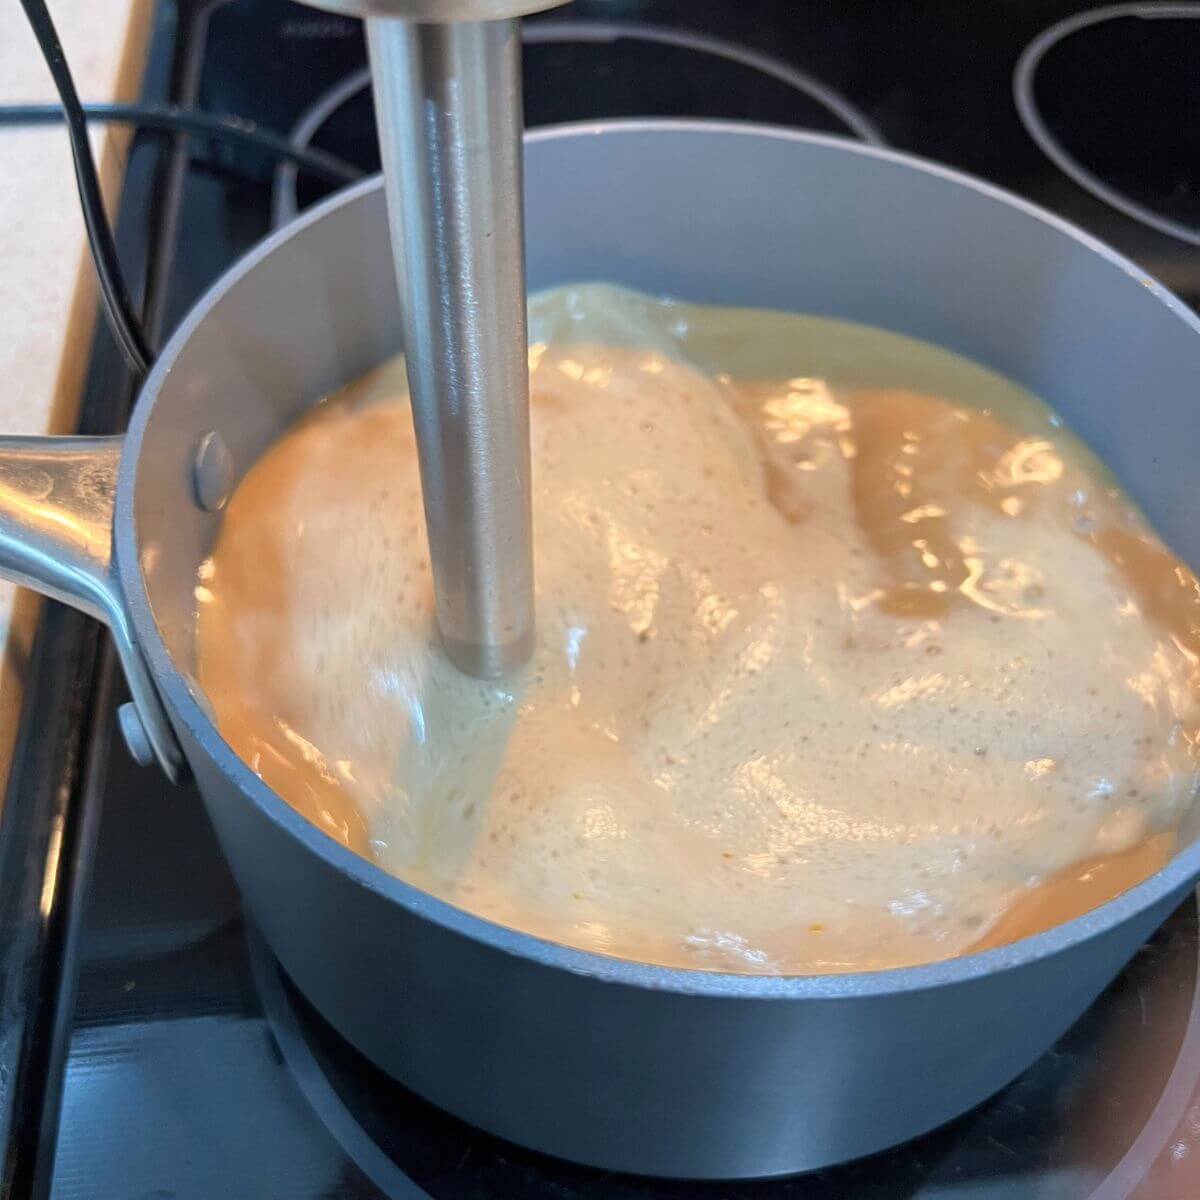 If you want the pumpkin spice latte extra frothy, after simmering for 5 minutes, transfer to a blender for 30 seconds or use an immersion blender right inside the saucepan.